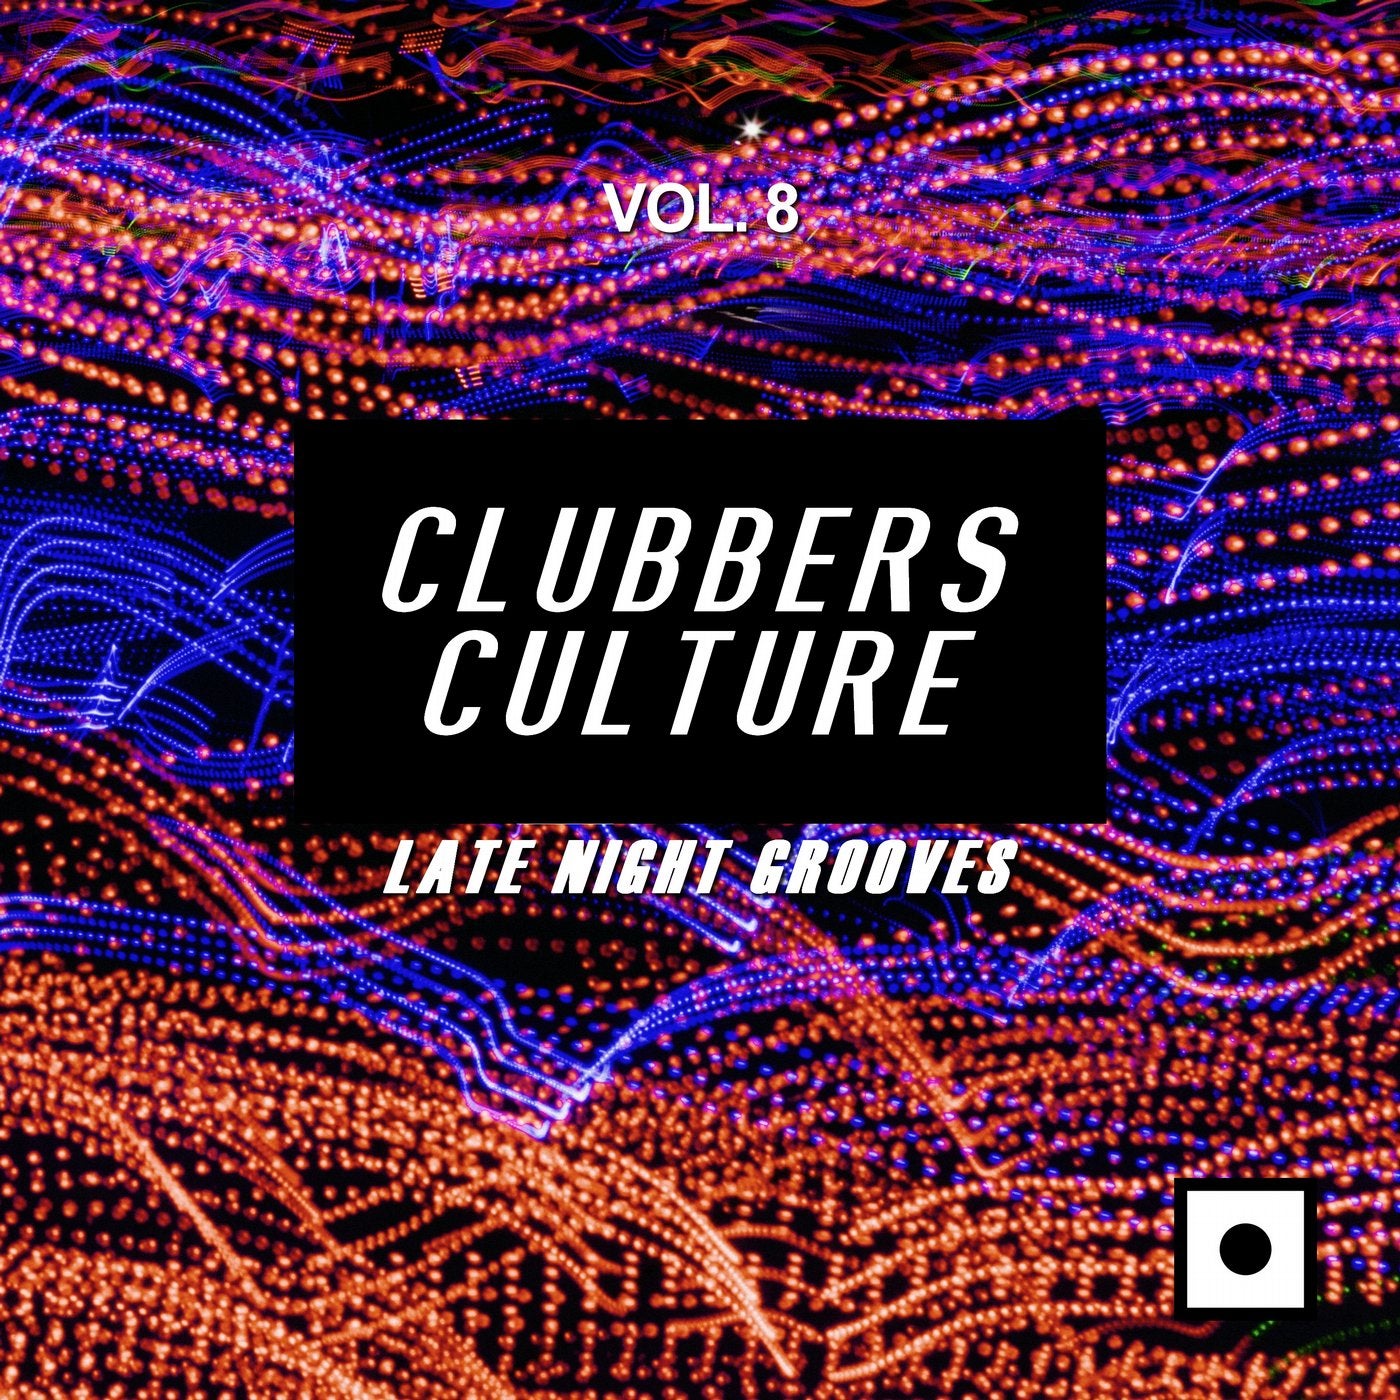 Clubbers Culture, Vol. 8 (Late Night Grooves)